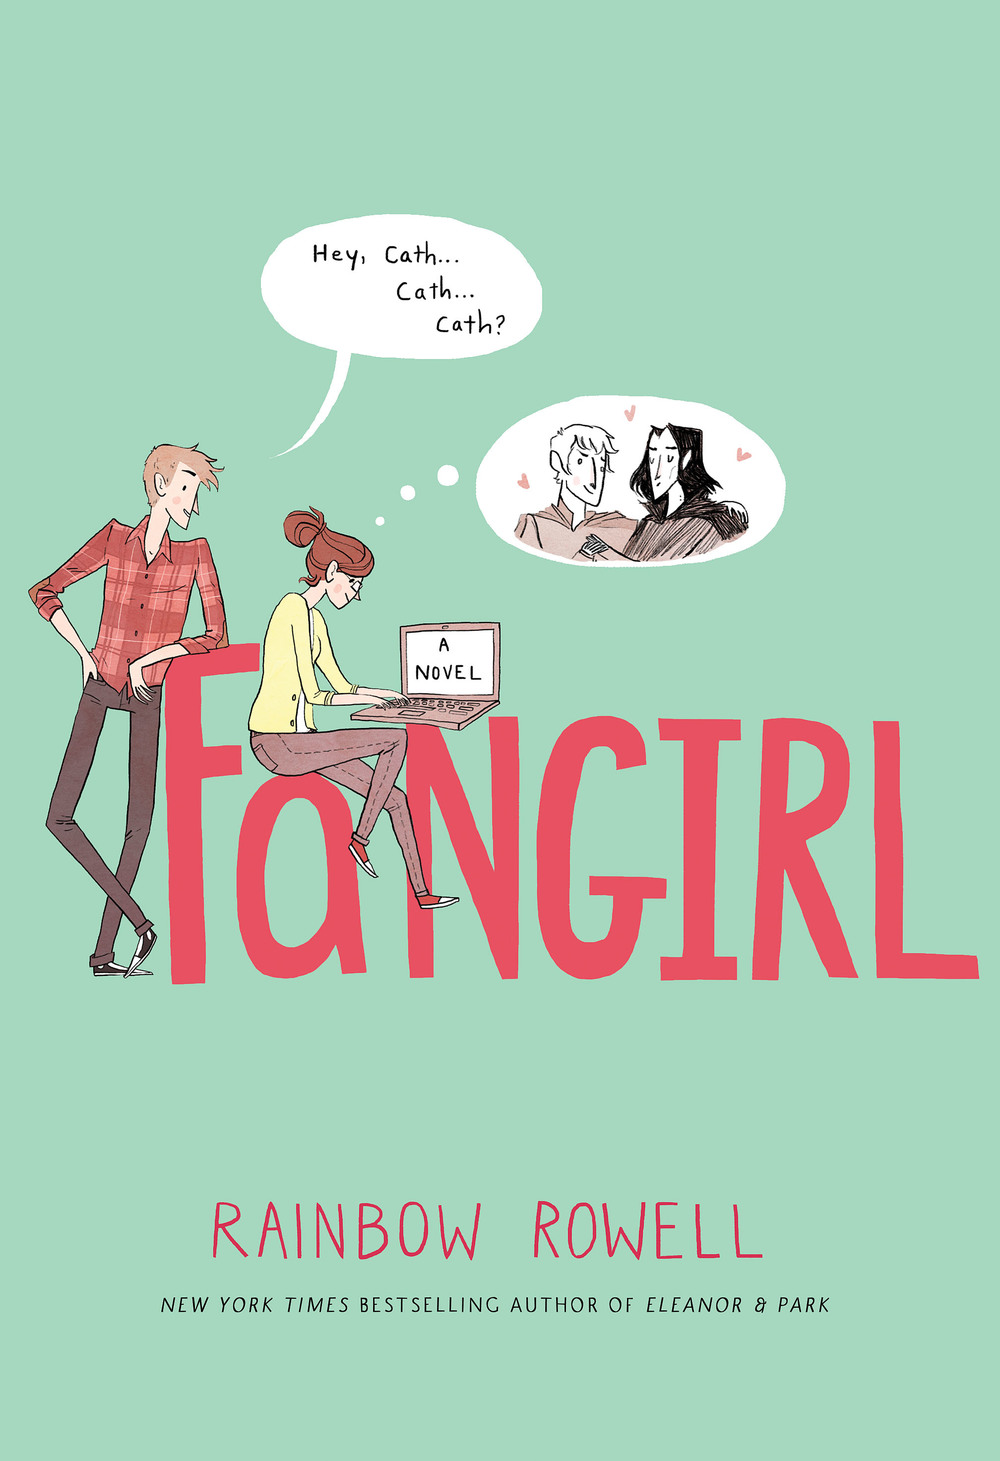 Fangirl book-cover